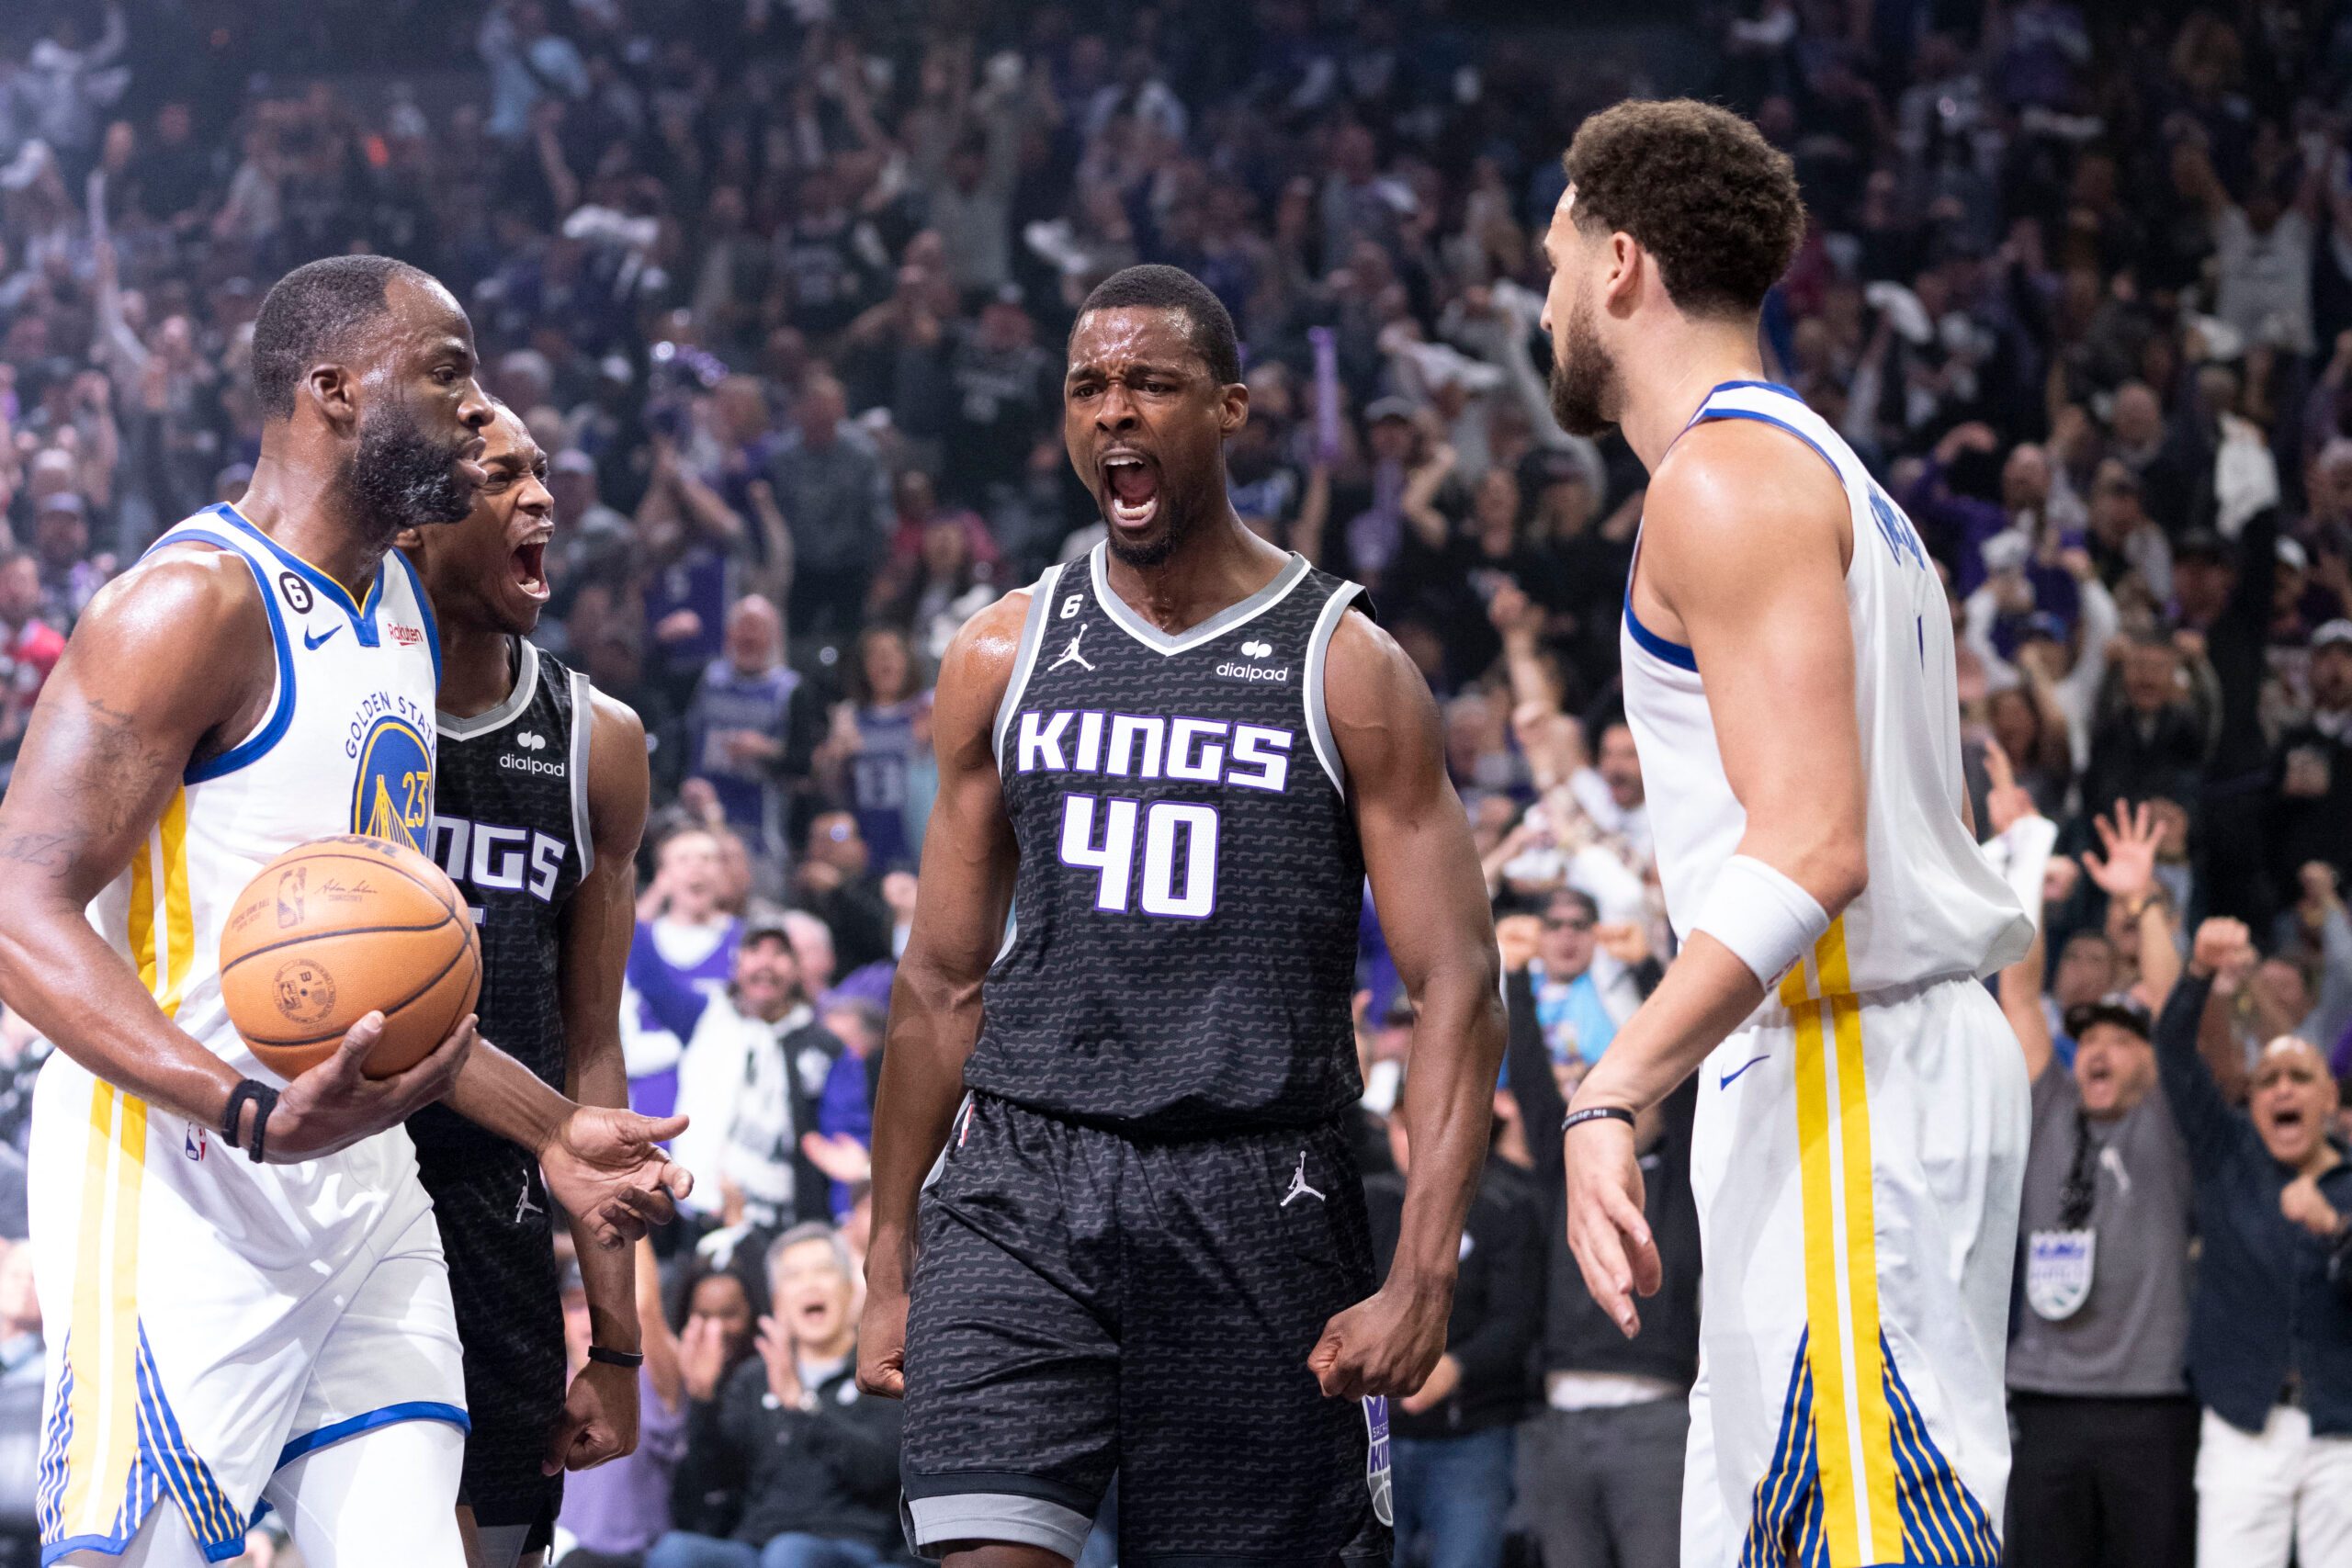 Kings Rule Over Nba Champ Warriors Anew For 2 0 Series Lead